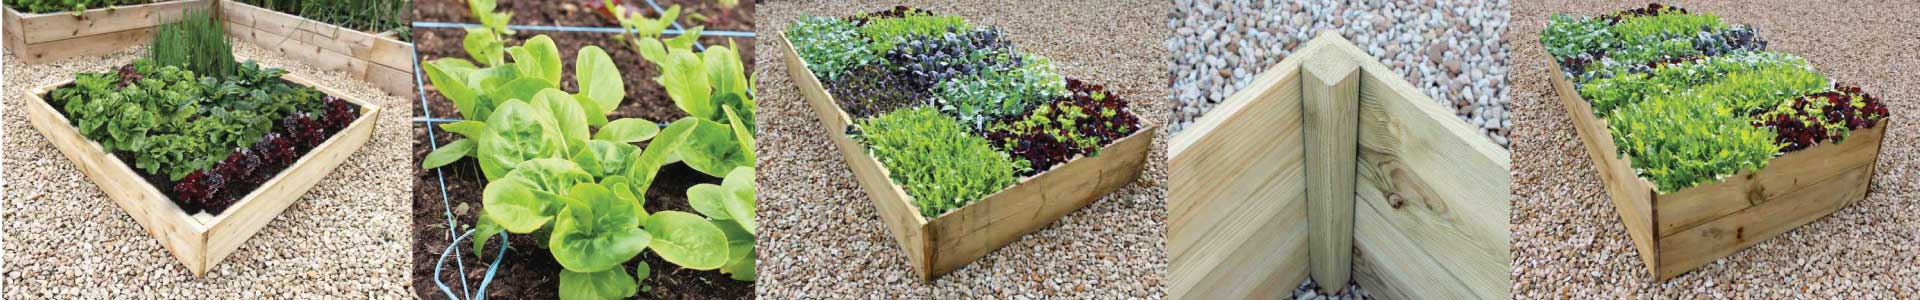 Allotment style timber raised garden beds